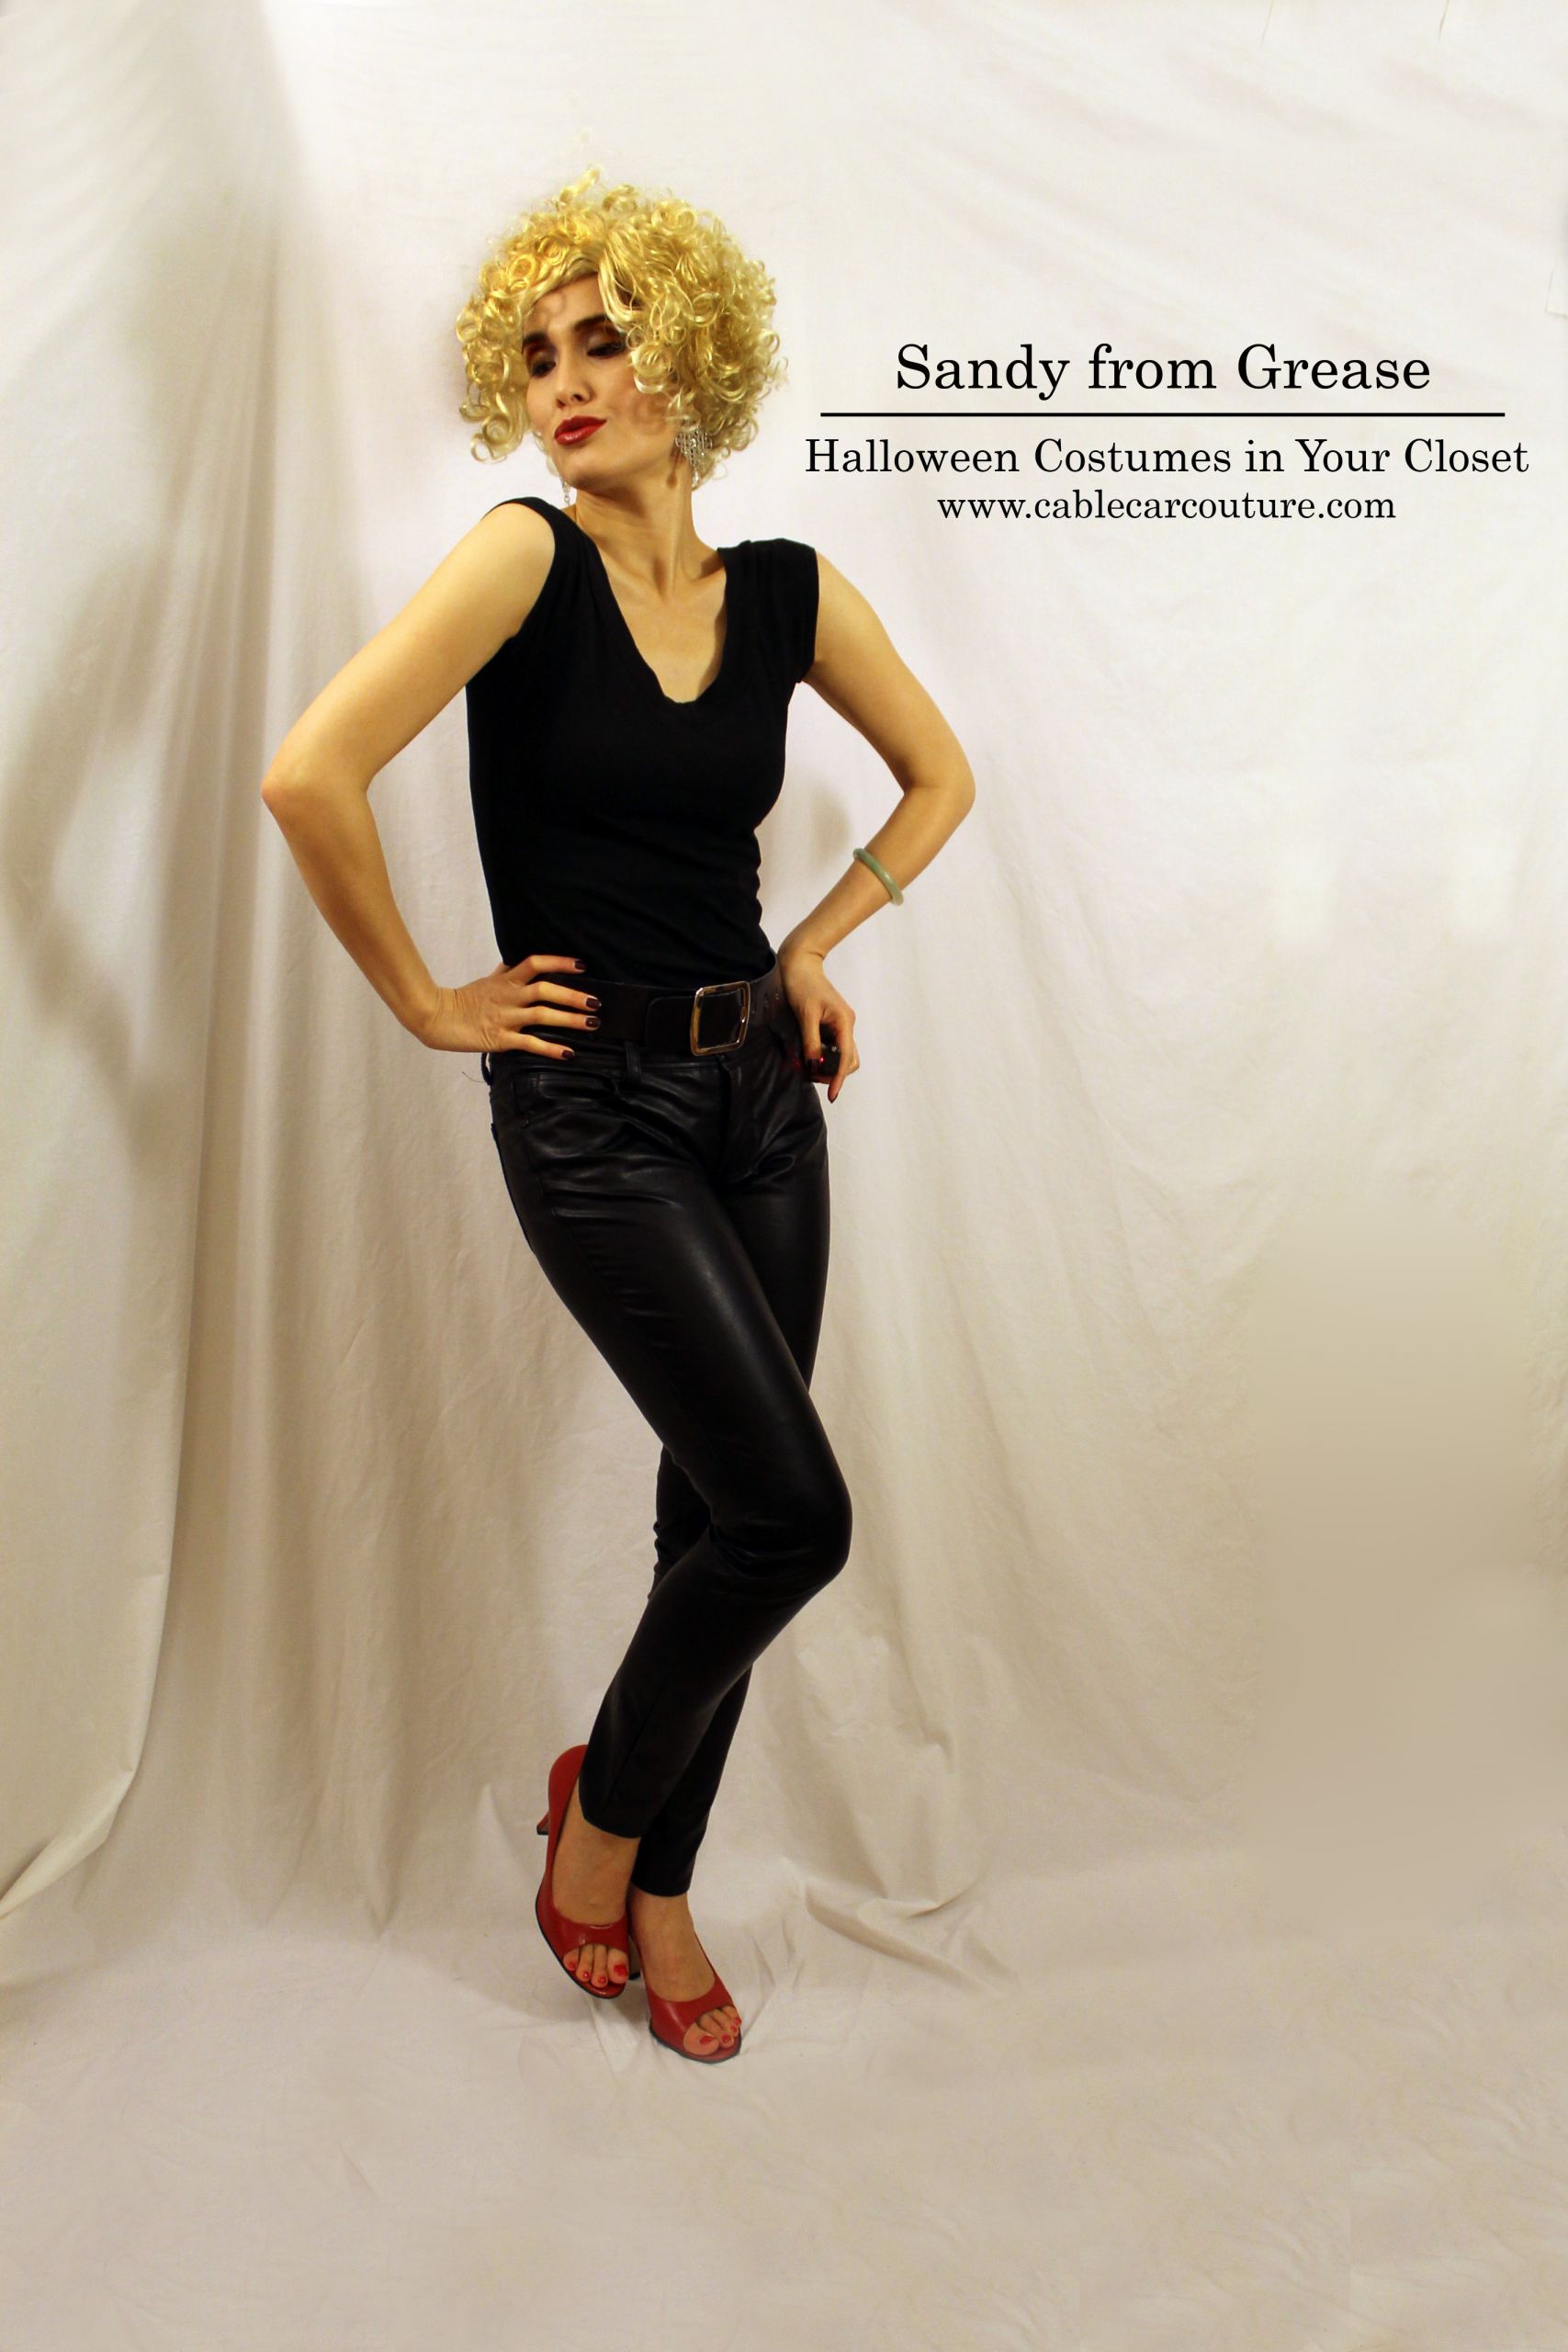 Sandy Grease Costume DIY
 Halloween Costumes In Your Closet Sandy from Grease